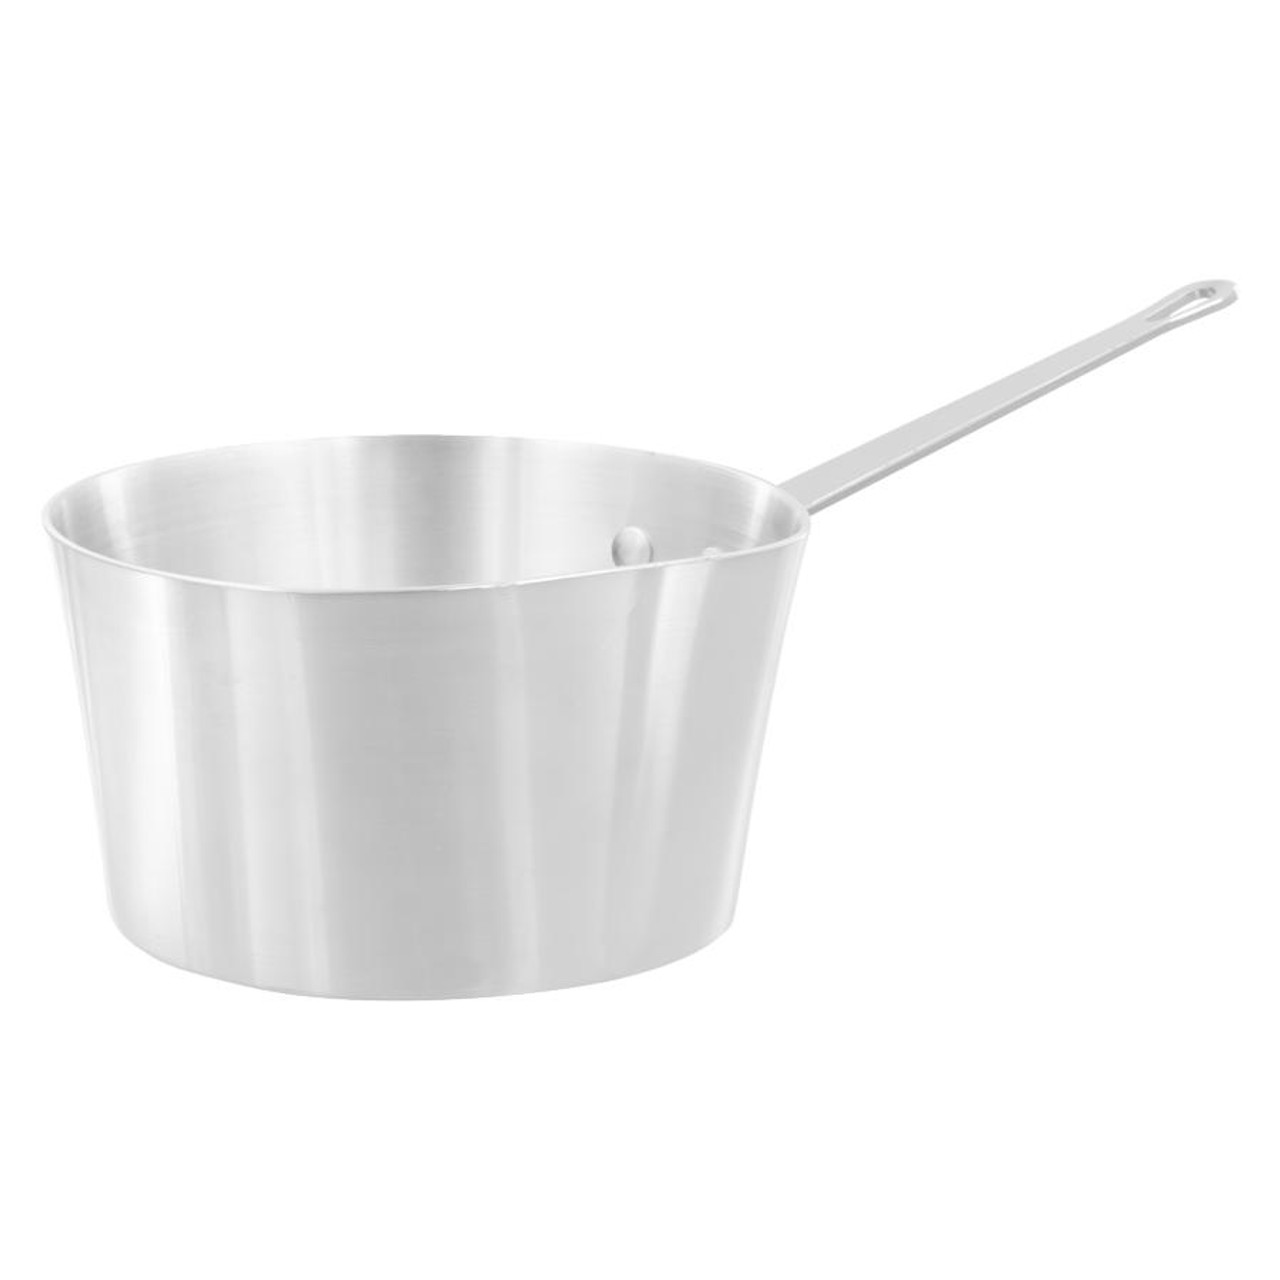 https://cdn11.bigcommerce.com/s-g5ygv2at8j/images/stencil/1280x1280/products/14898/29700/thermalloy-gfs-tapered-aluminum-sauce-pan-3.5-quart-versatile-and-efficient-cookware__54500.1688348226.jpg?c=1